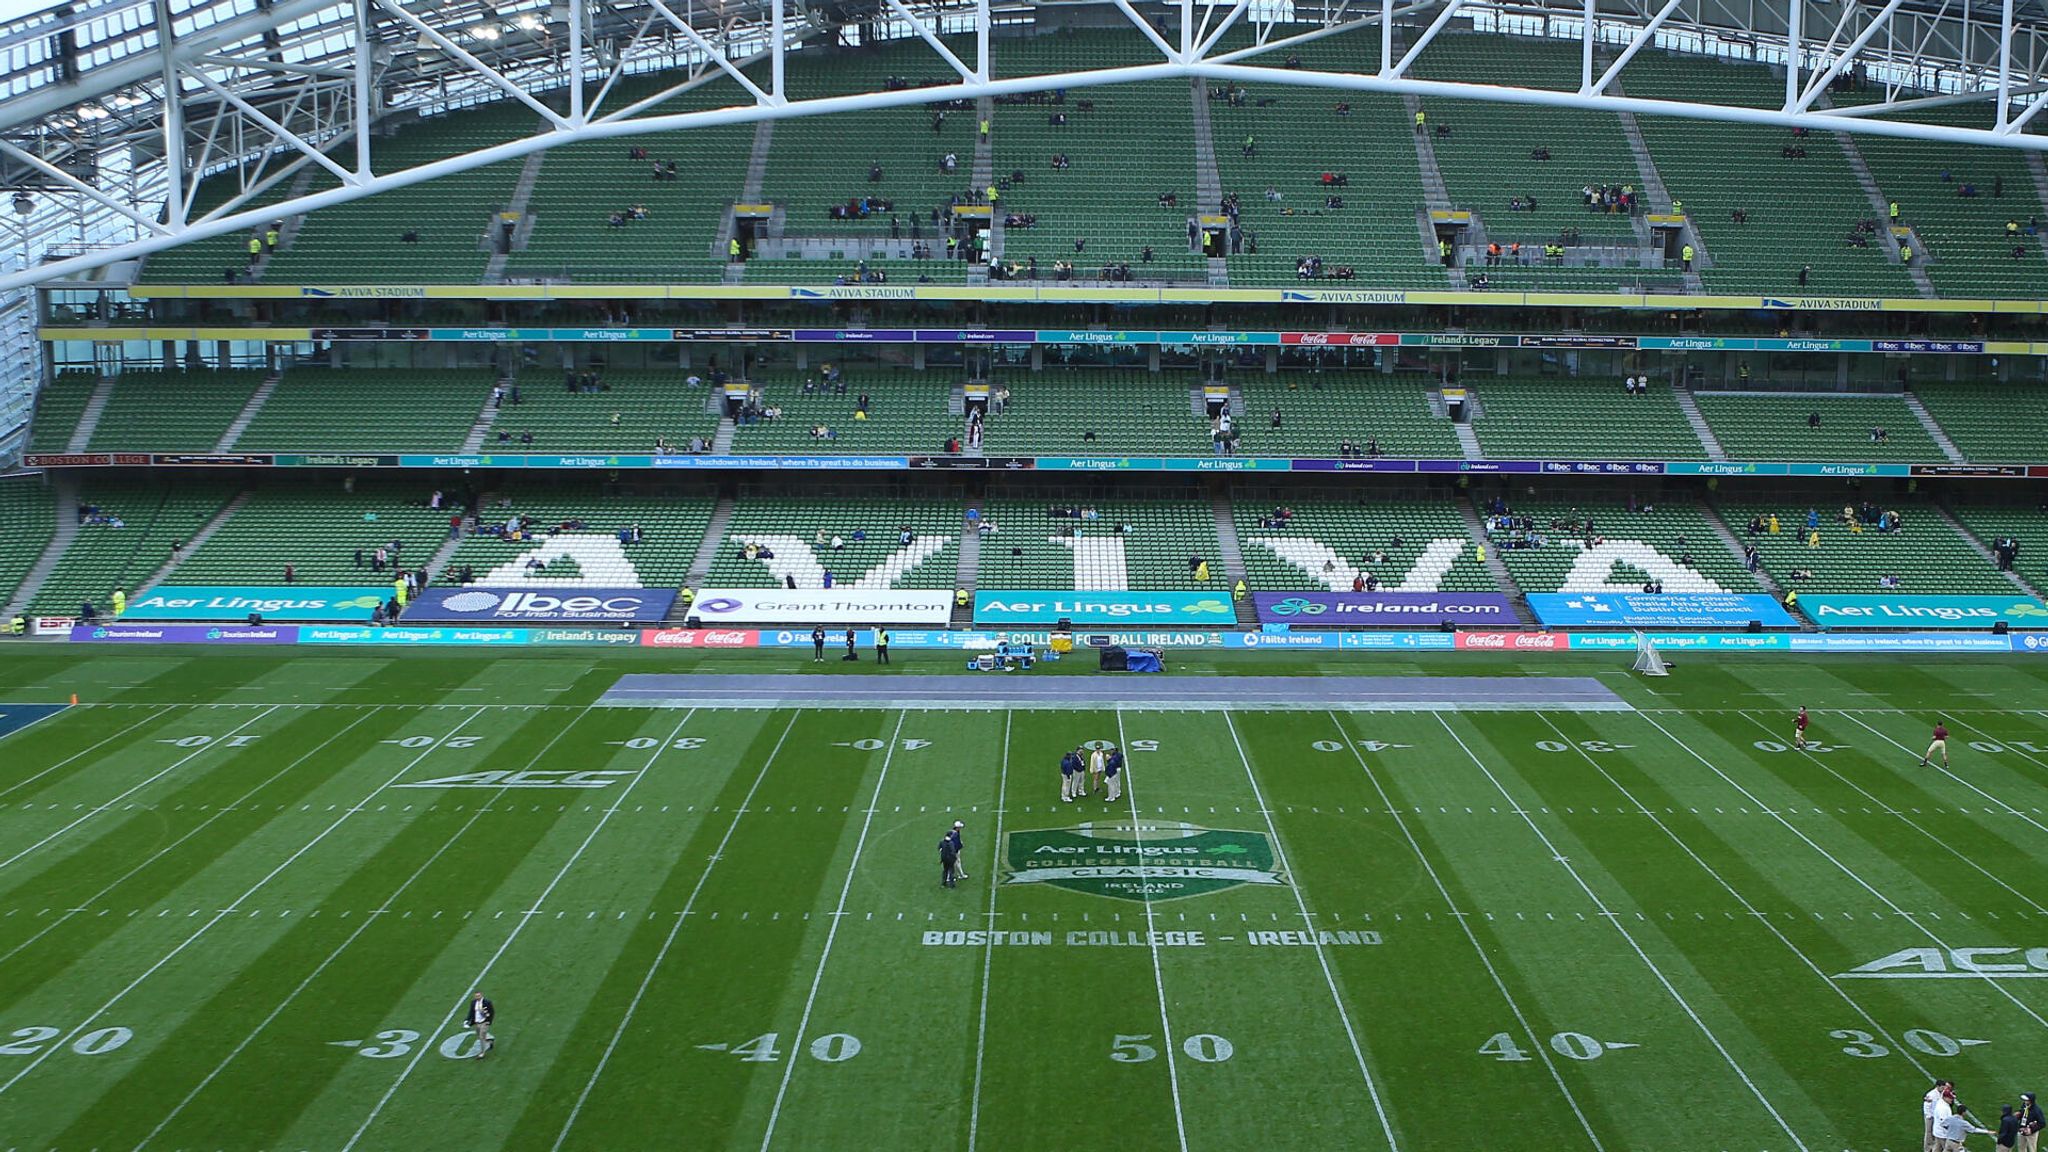 Nfl In Ireland Dublin Open To Hosting Future Games And Eyes College Football Partnership Beyond 26 Nfl News Sky Sports